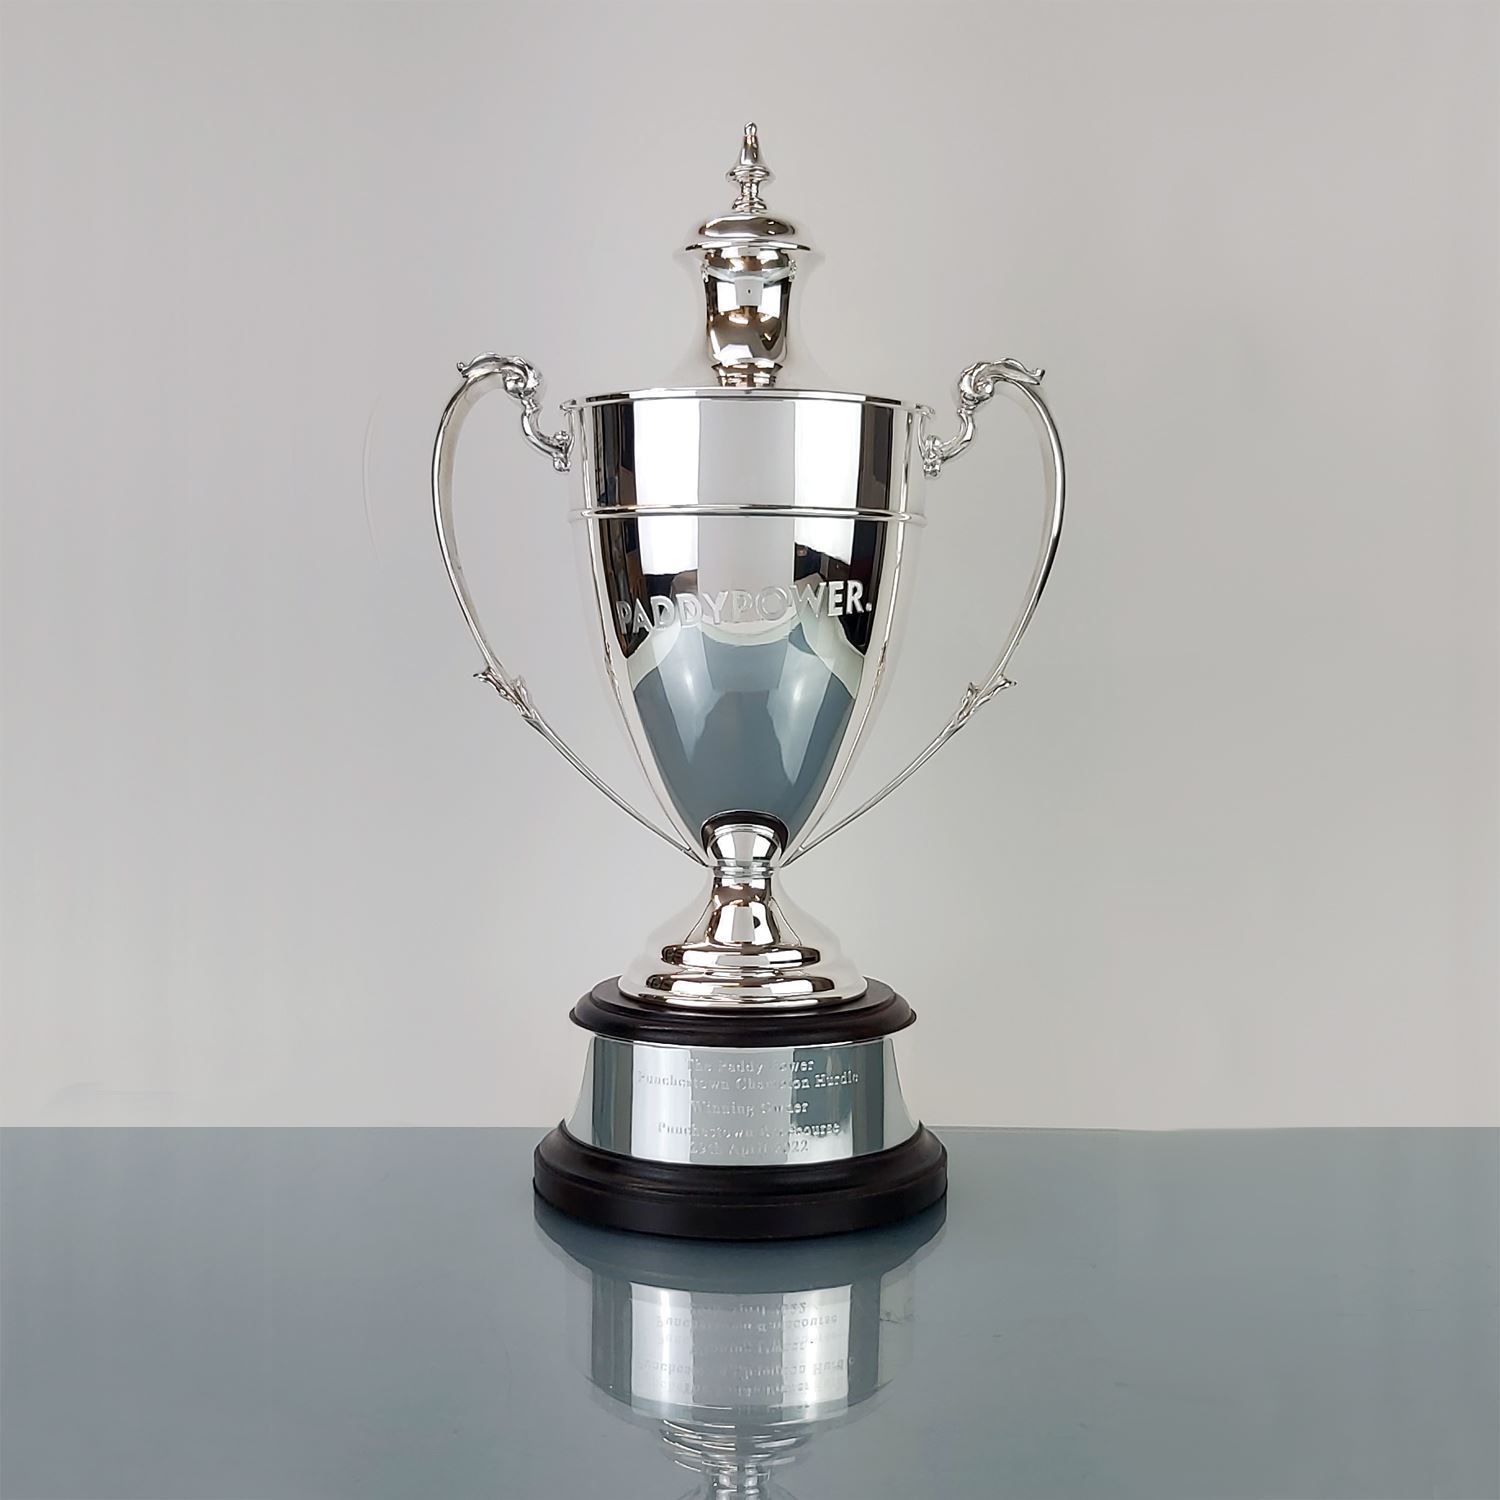 List of the best Replica Trophies available on  – Engrave